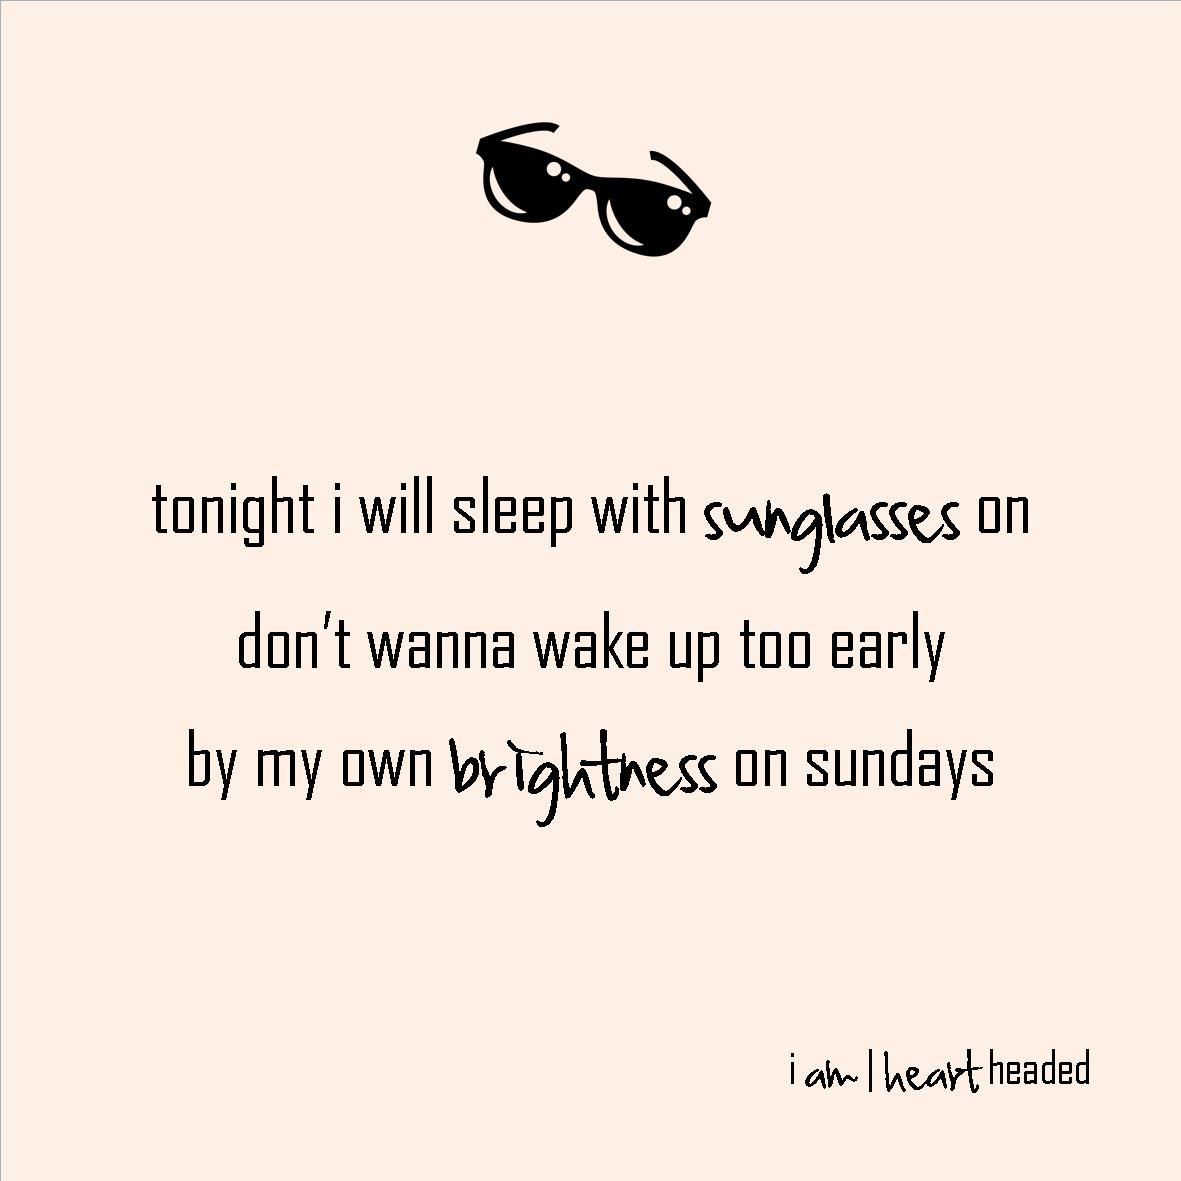 full-size featured image of quote 'sunglasses on sunday' in category 'wacky' at i am | heart headed